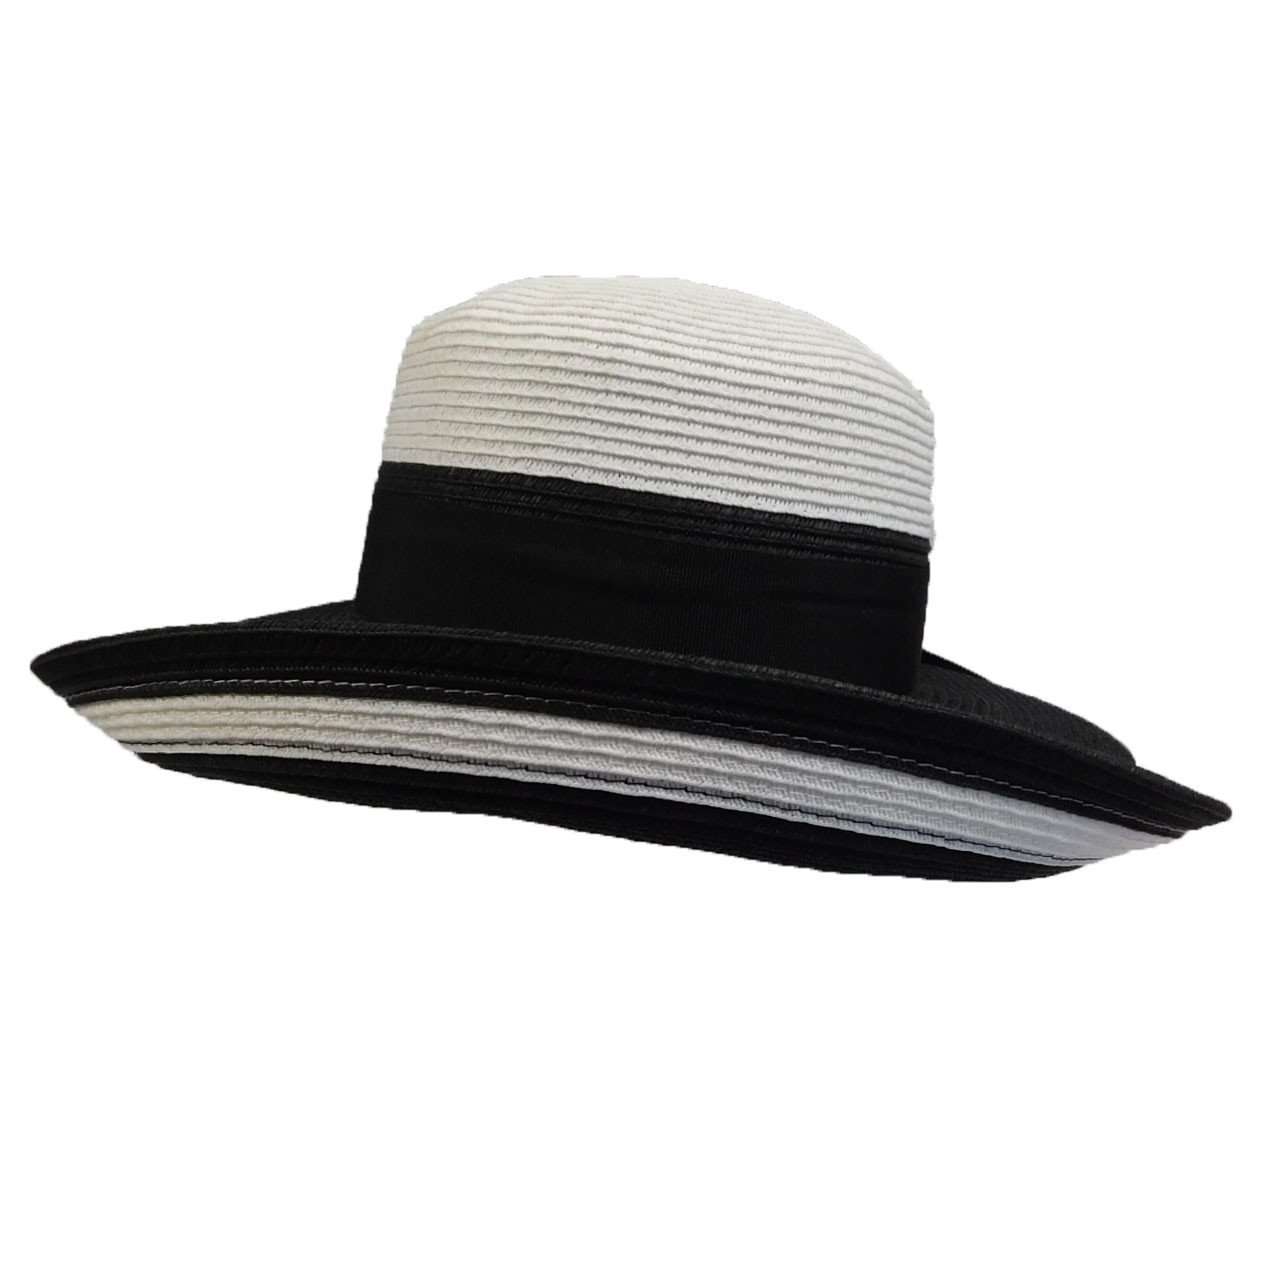 Tiffany Style Summer Hat by Karen Keith - Black and White Wide Brim Hat Great hats by Karen Keith    